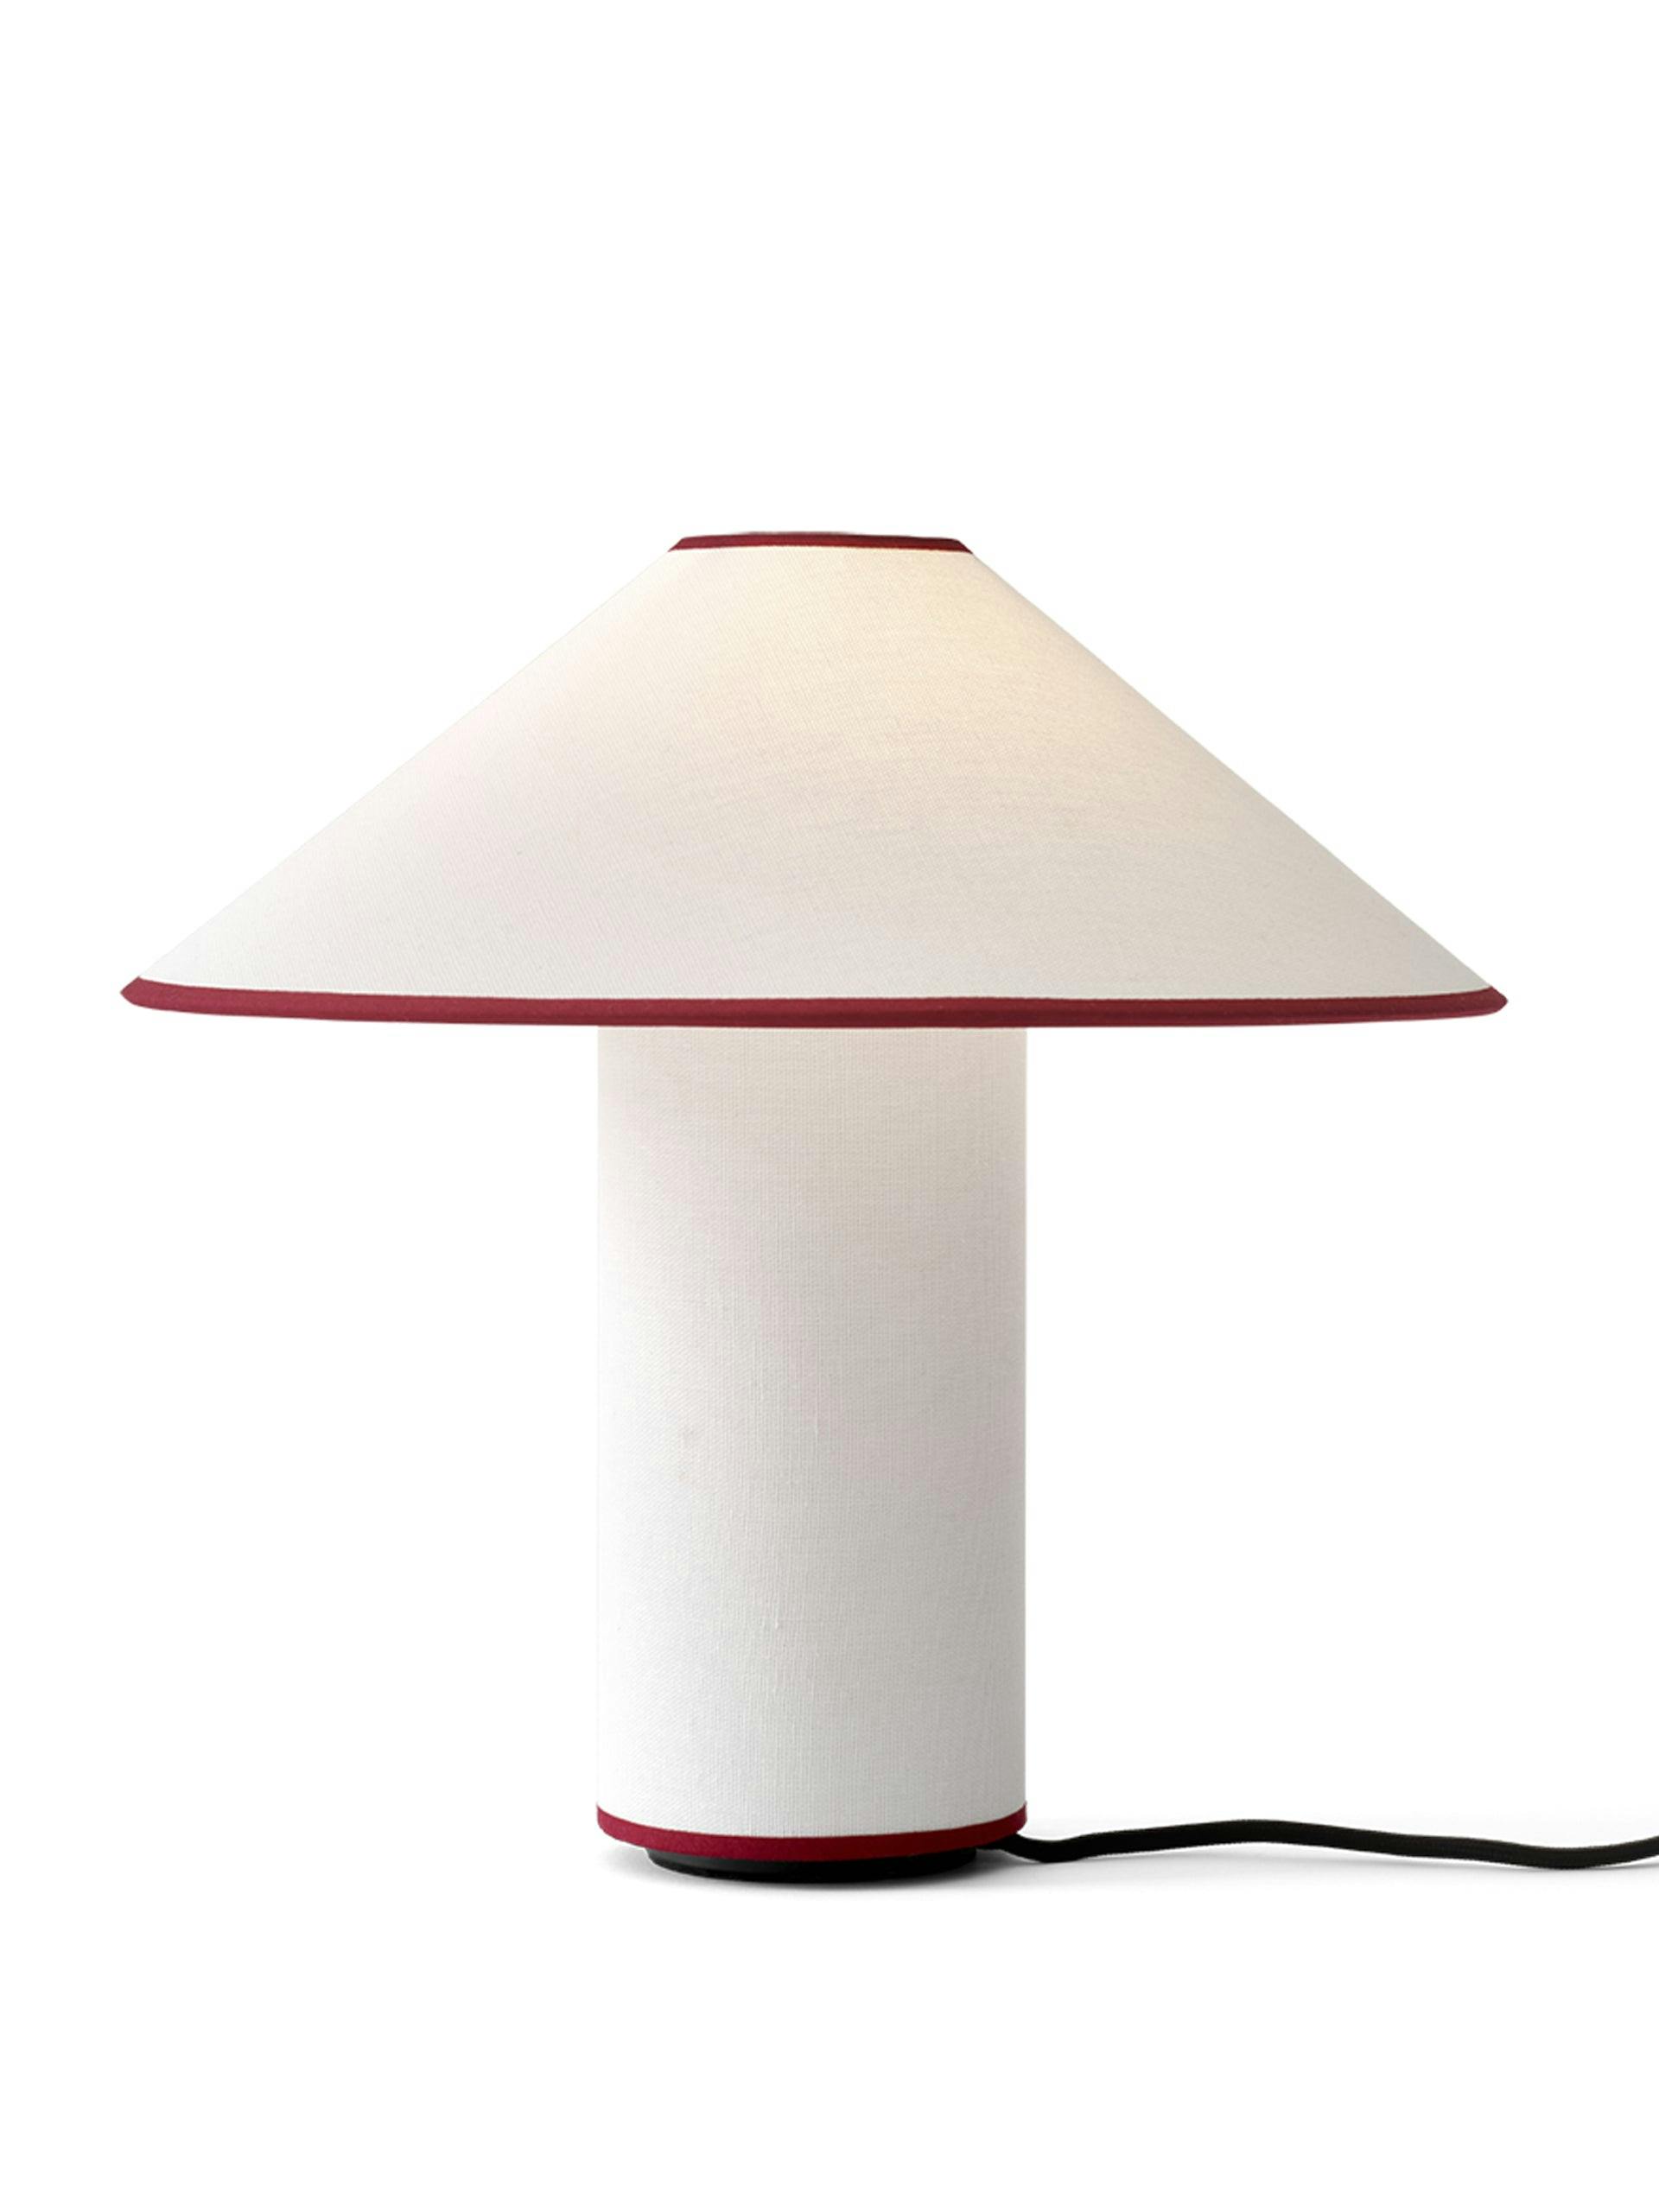 White table lamp with red rim